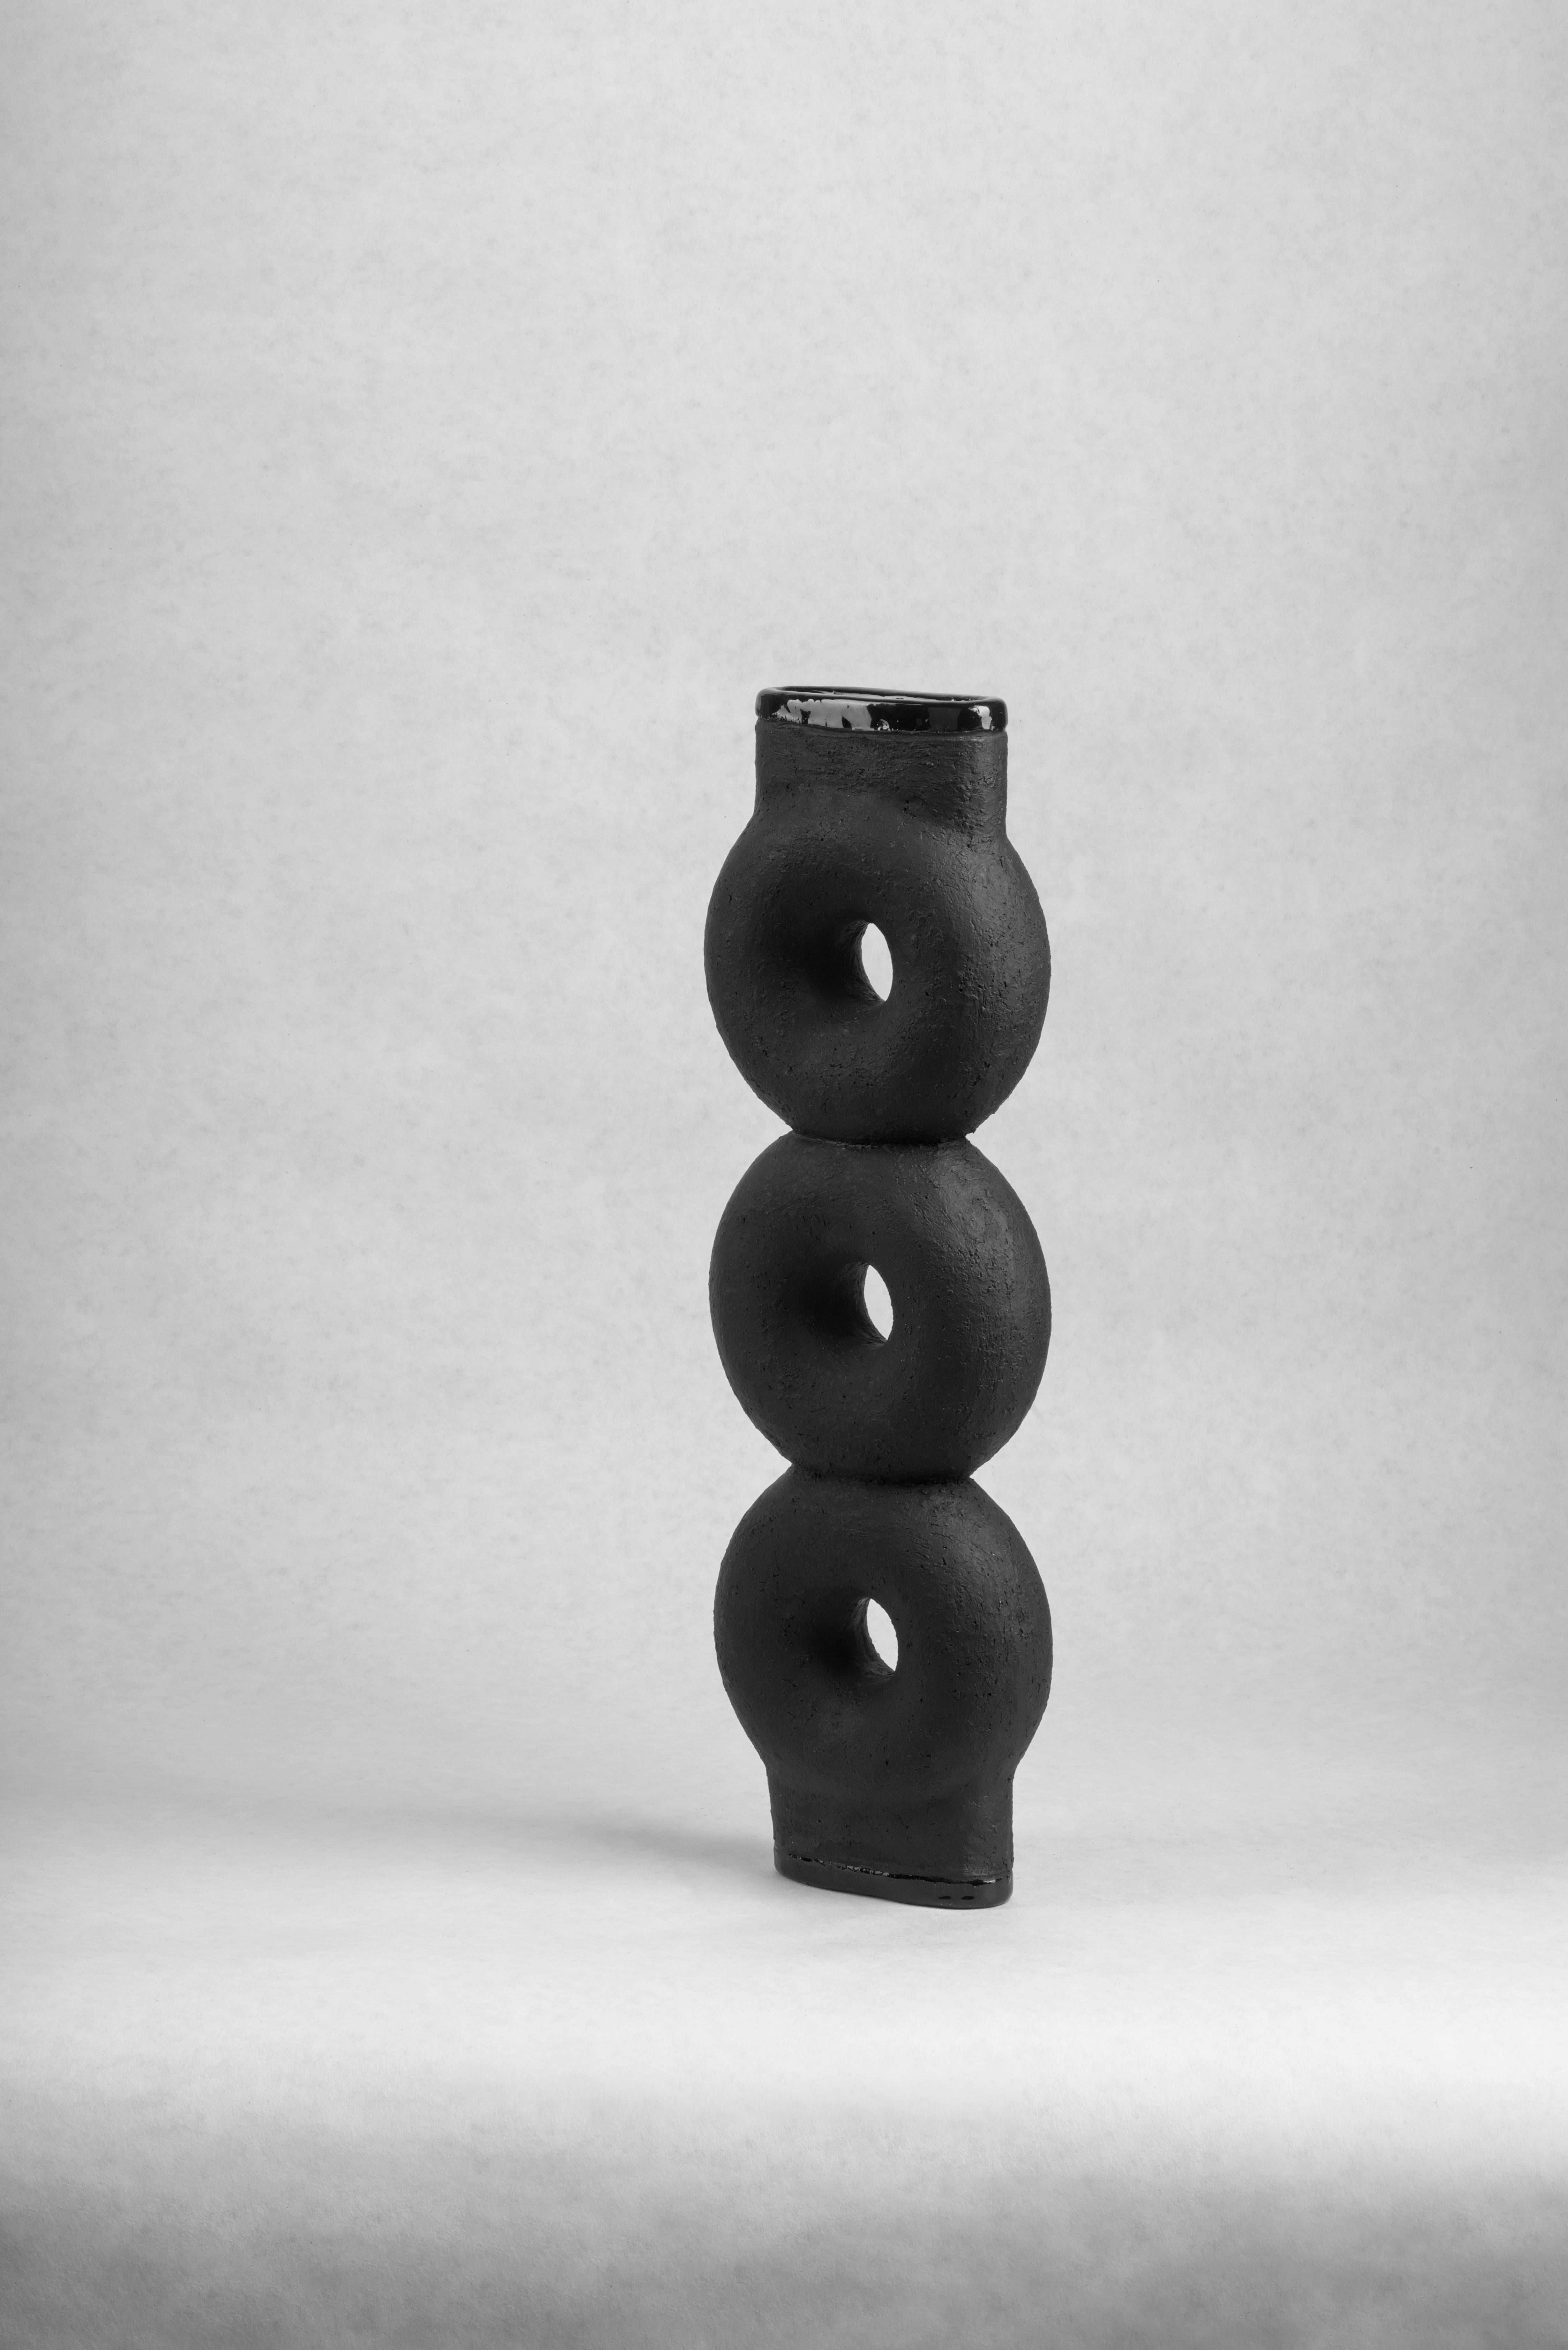 Pair of sculpted ceramic vase by FAINA
Design: Victoriya Yakusha
Material: Material: clay / ceramics
Dimensions: 14 x 5 x H 43.5 cm


The vase is part of a series of 5 vases, the set of vases consists of :

1. Vase on three legs height 500 x